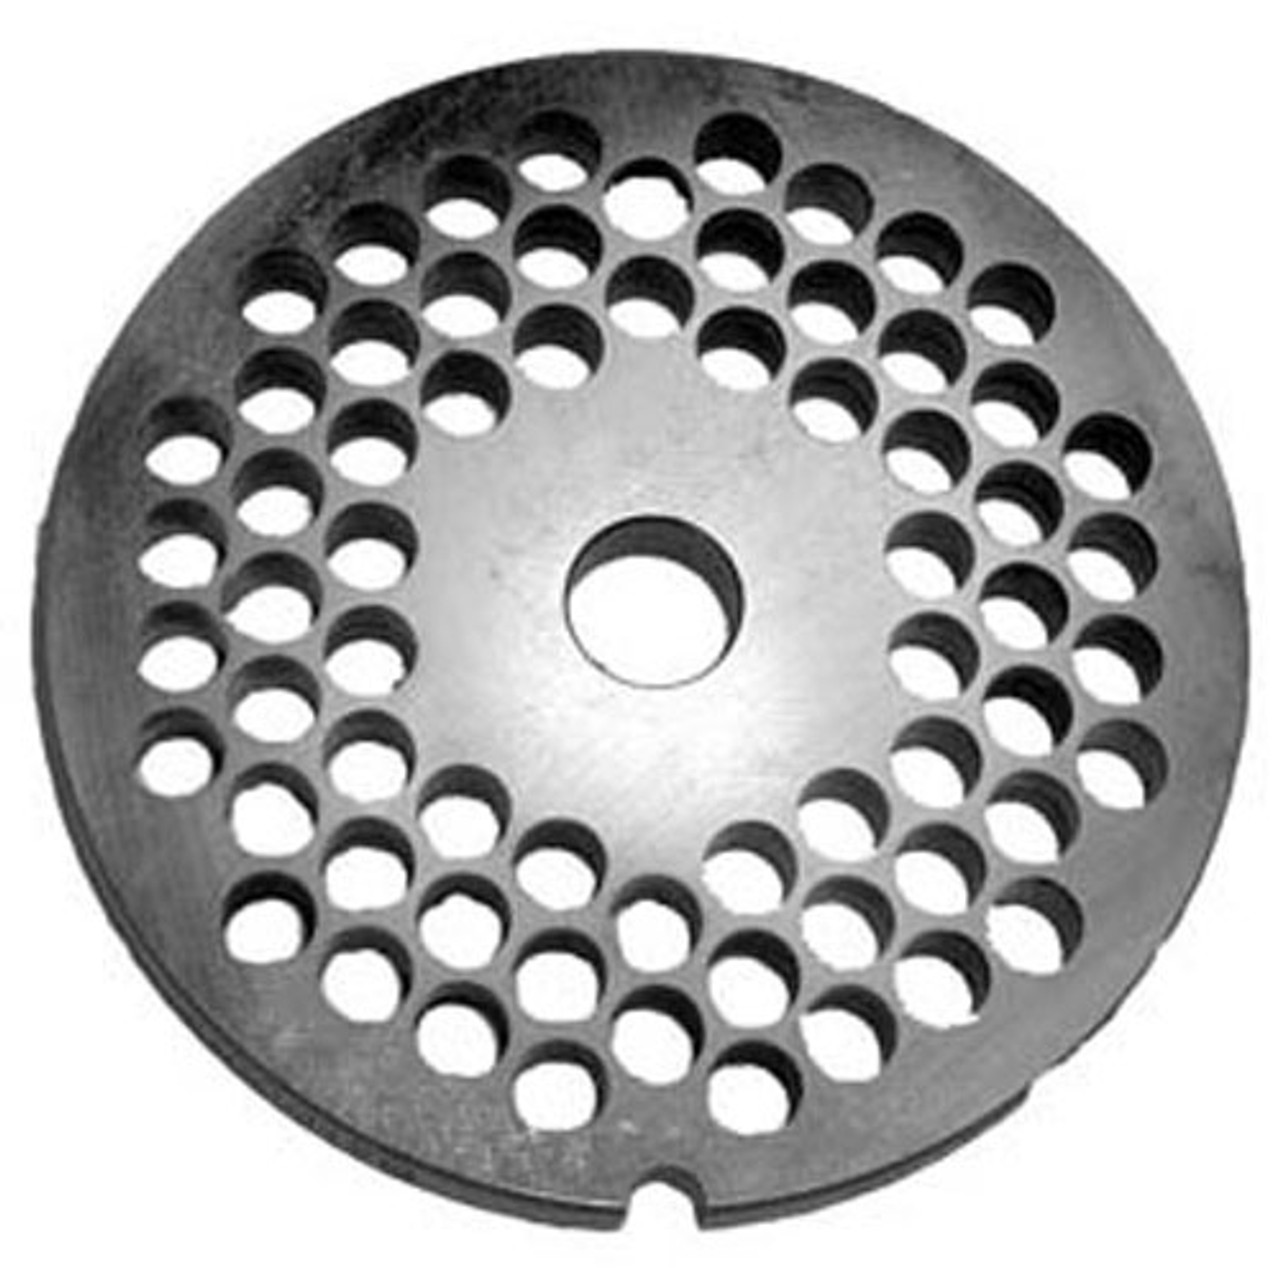 Chopper Plate - Replacement Part For Univex 1000729